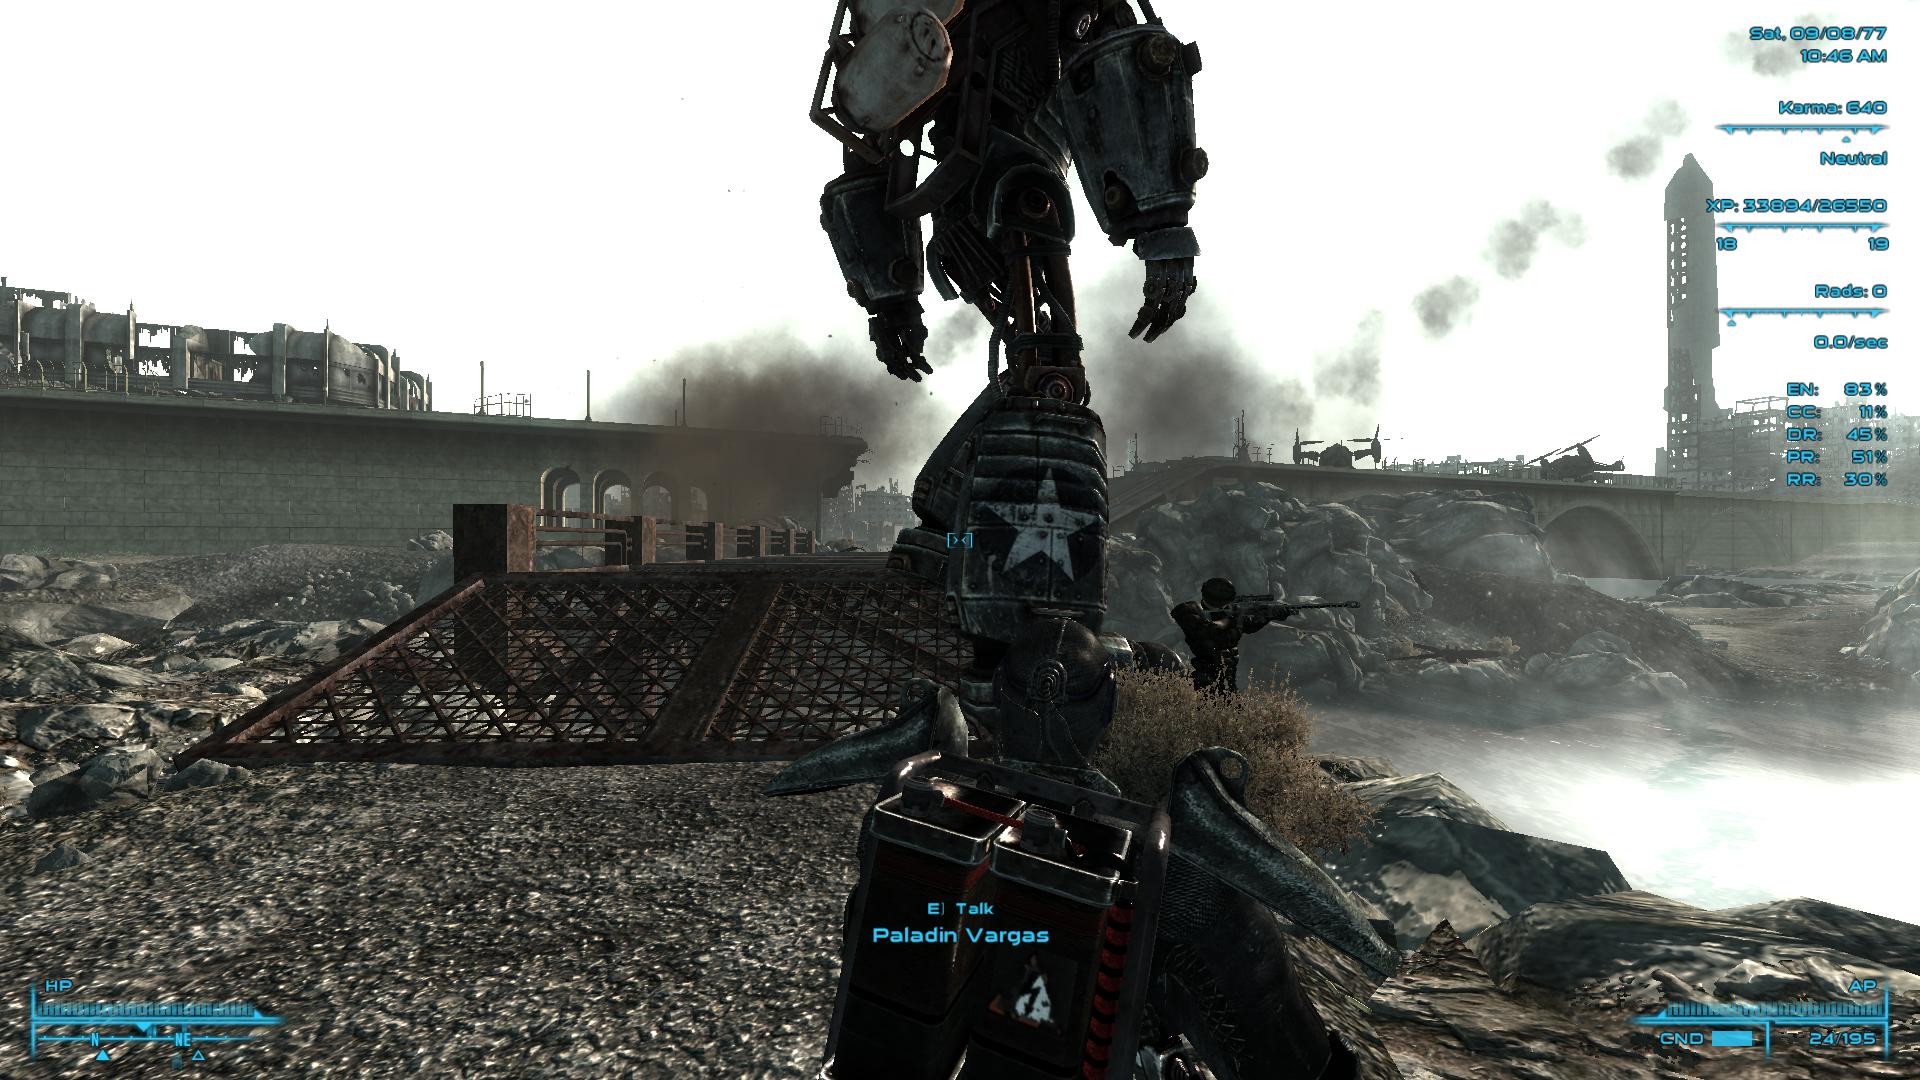 1920x1080 Liberty Prime won't move during Take it Back! quest. - Fallout 3 Message  Board for PC - GameFAQs